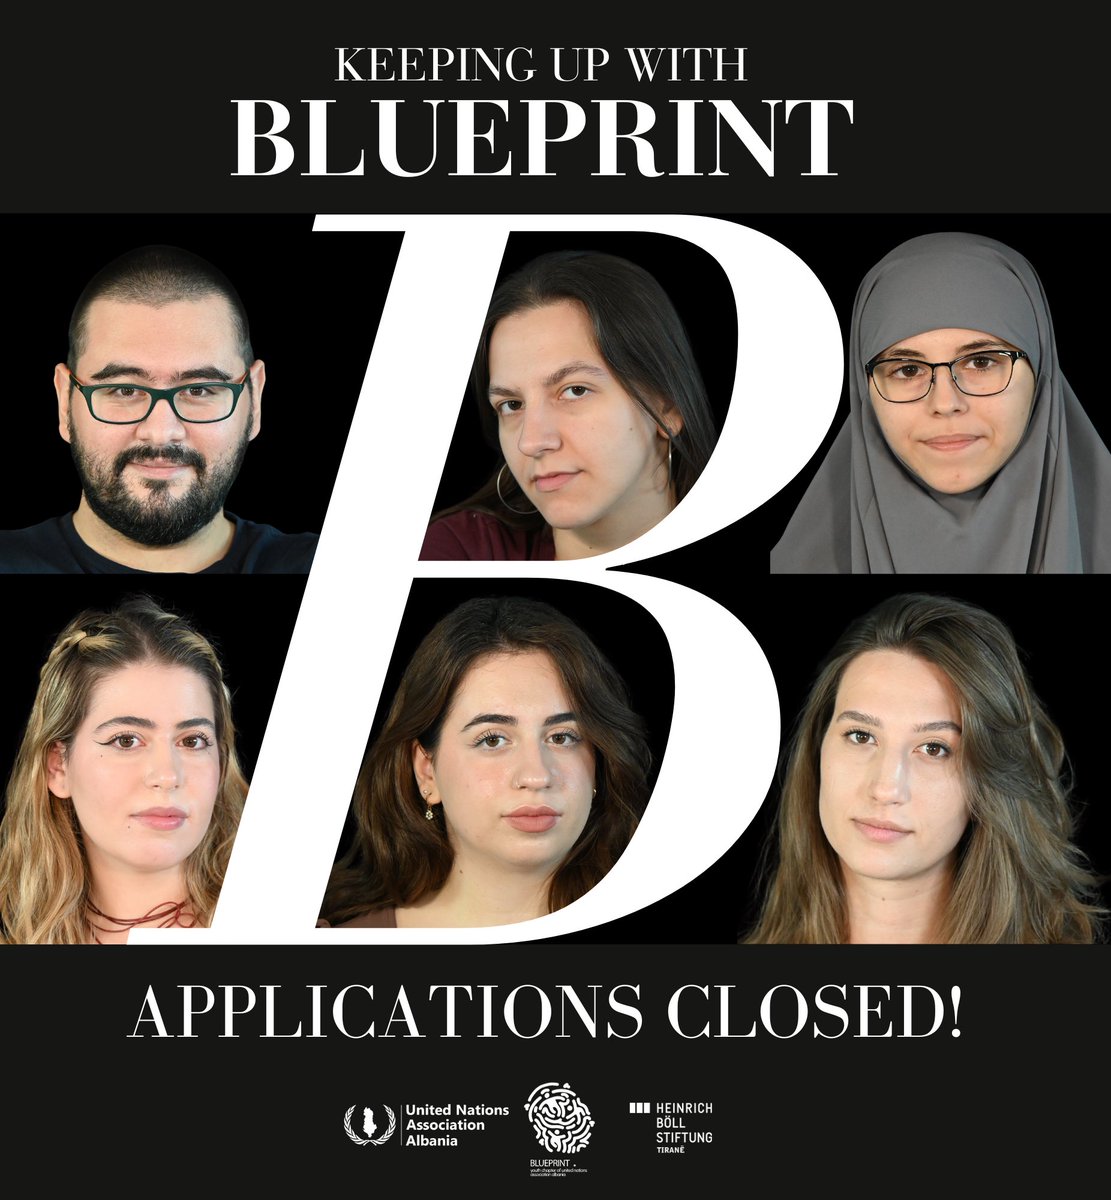 Applications to become a member of Blueprint are now officially closed! We would like to thank everyone who expressed interest and applied.✨

📧We advise you to keep checking your email to find out if you have been selected for the next recruitment phase.